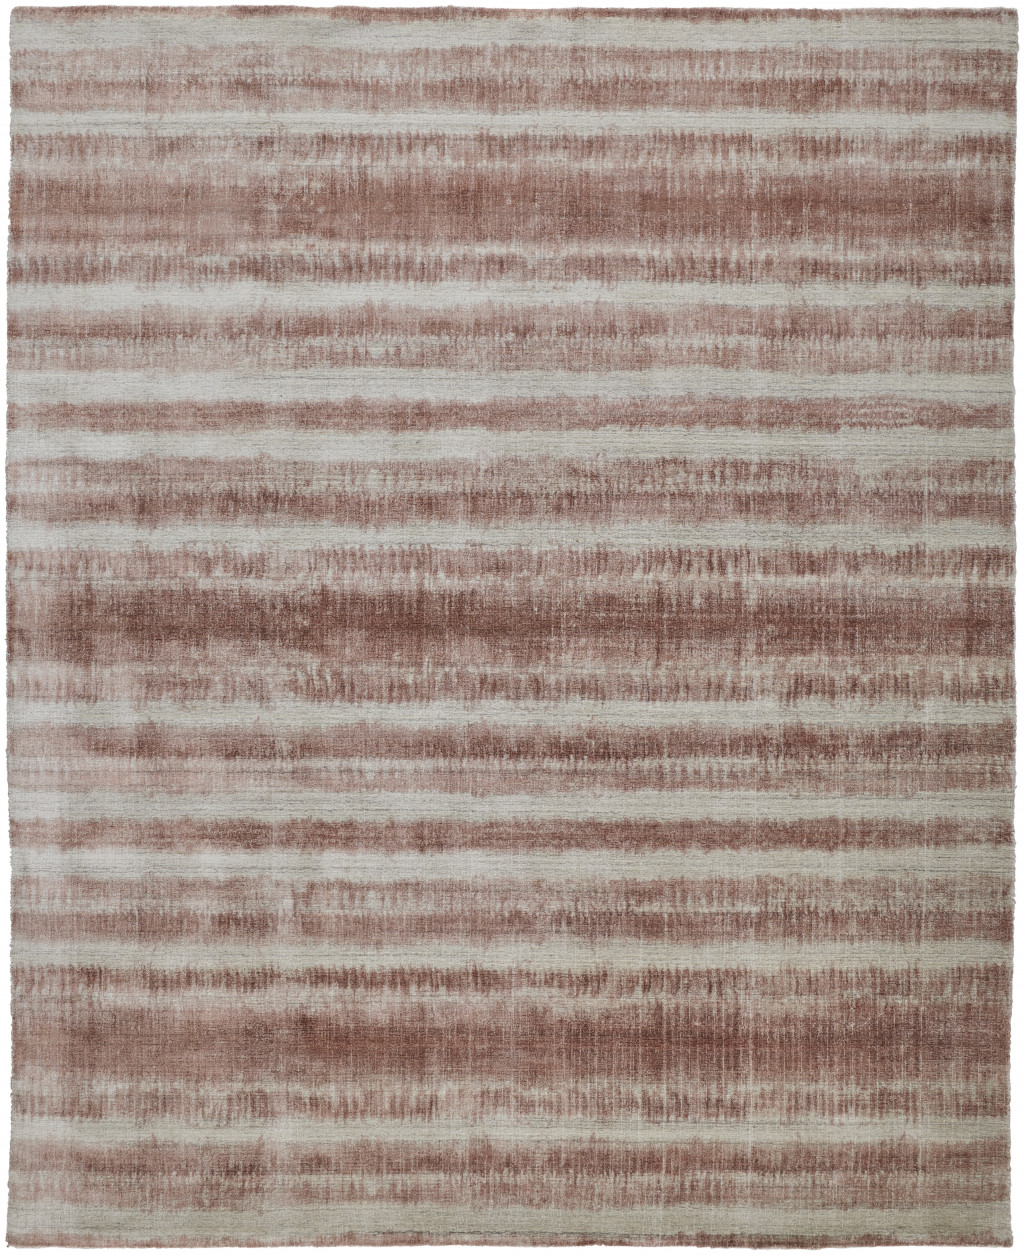 12' X 15' Tan Ivory And Pink Abstract Hand Woven Area Rug-514426-1